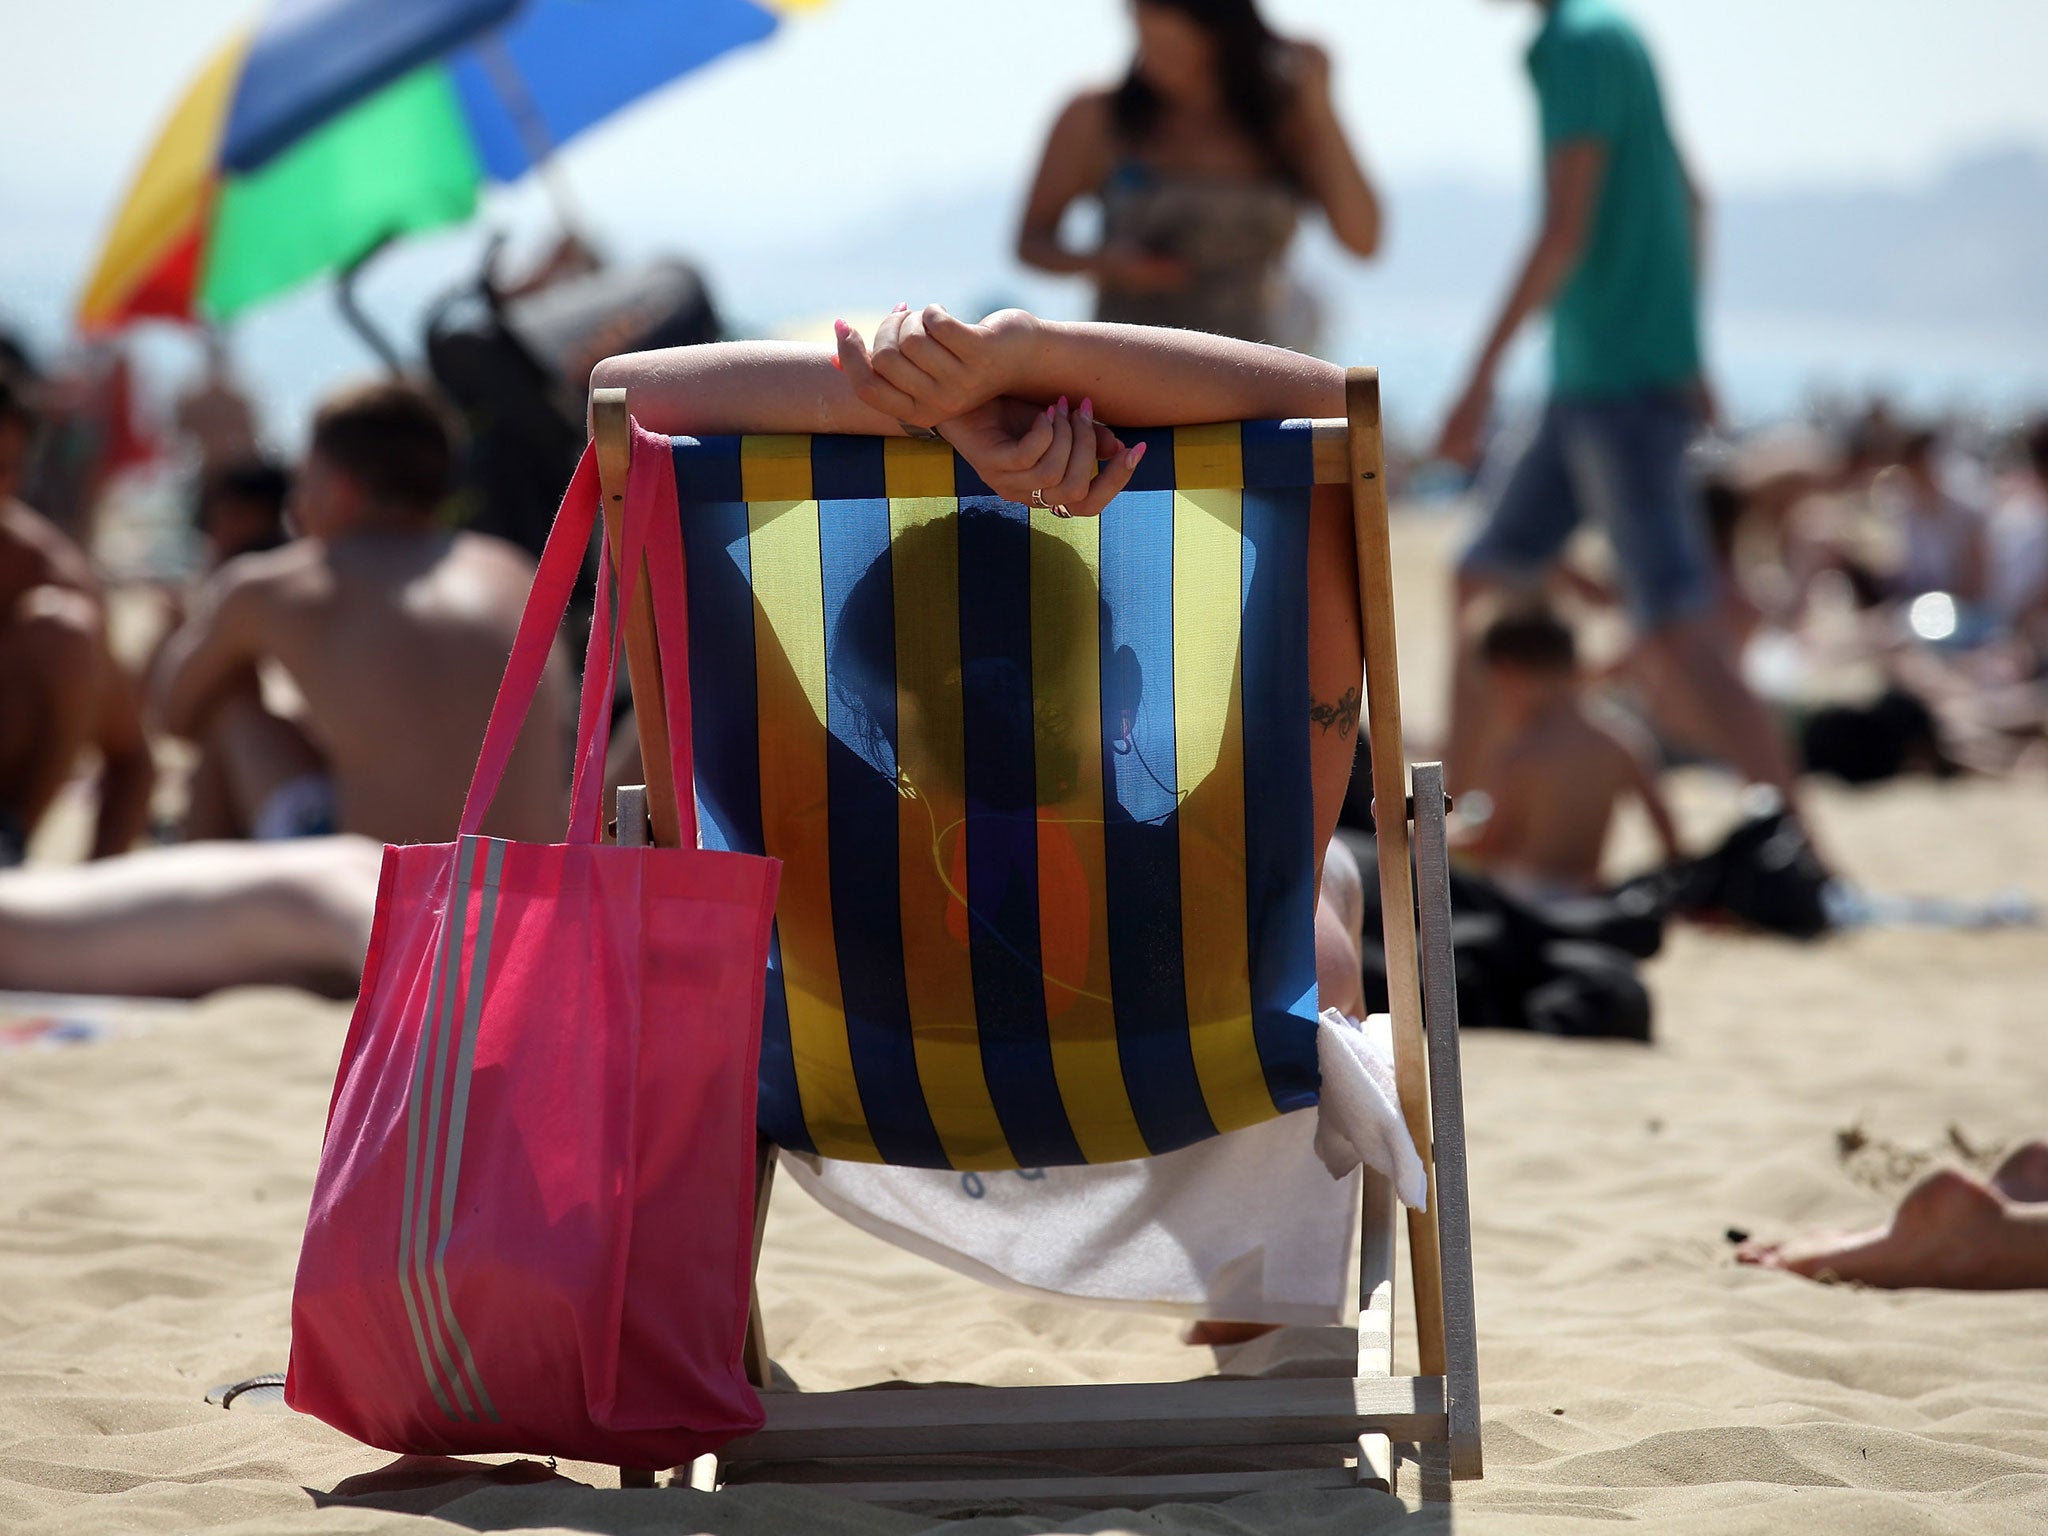 Thousands of families will not be packing their buckets and spades this bank holiday because they cannot afford to take their children to the beach